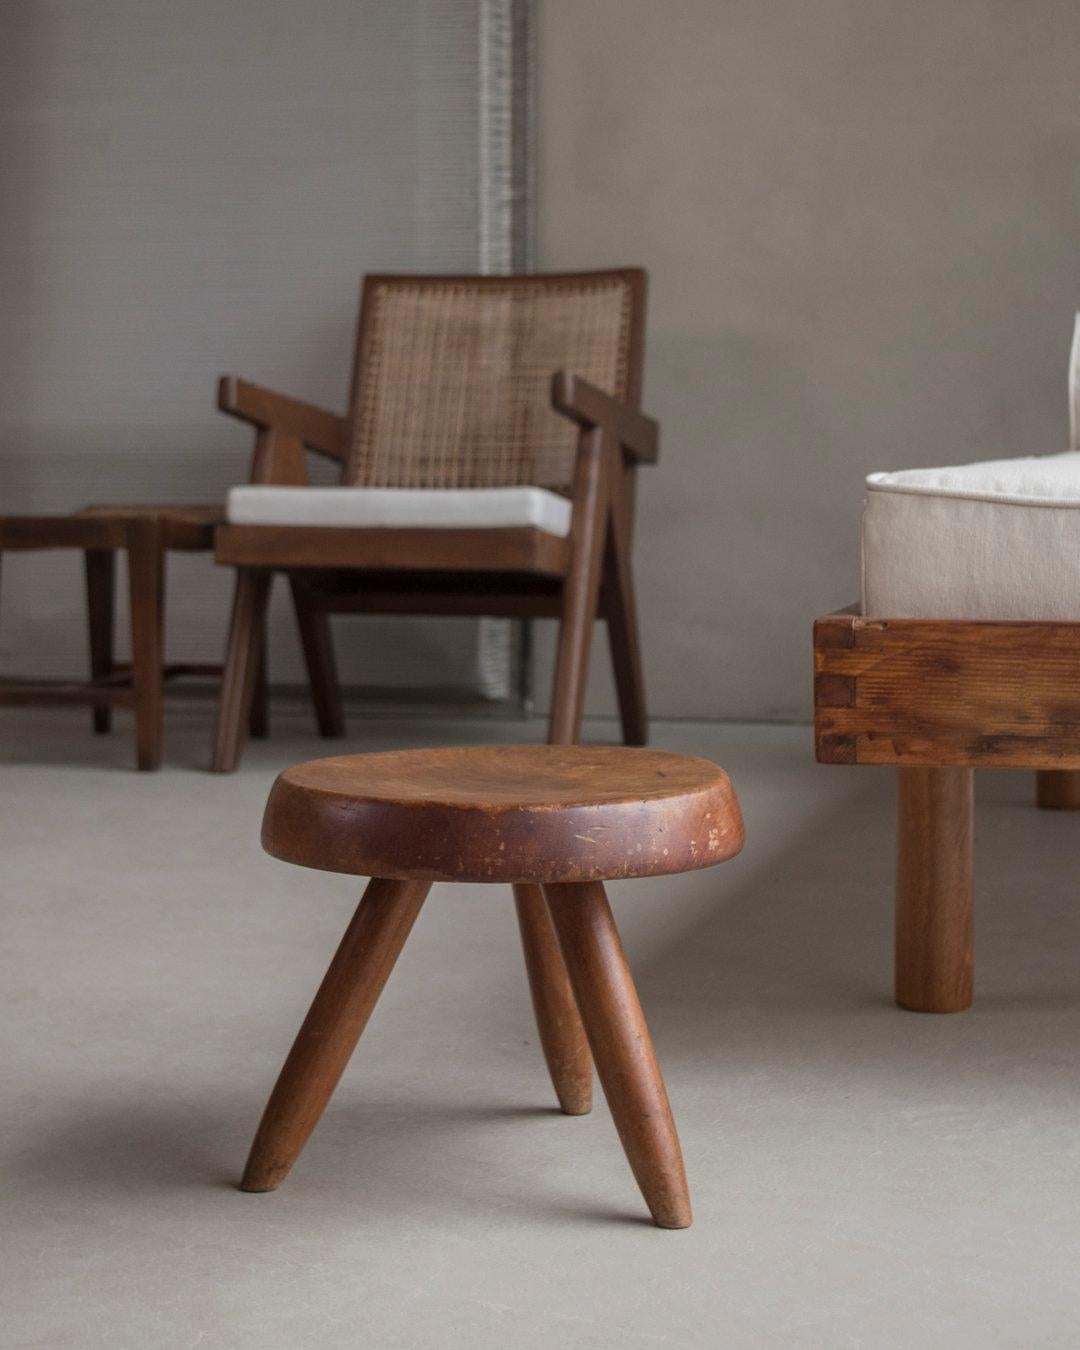 Vintage berger stool - circa 1950s - solid single slab mahogany top - provenance private residence Paris, France

The Berger stool, a timeless piece of furniture, was designed in 1953 by renowned French architect and designer Charlotte Perriand.